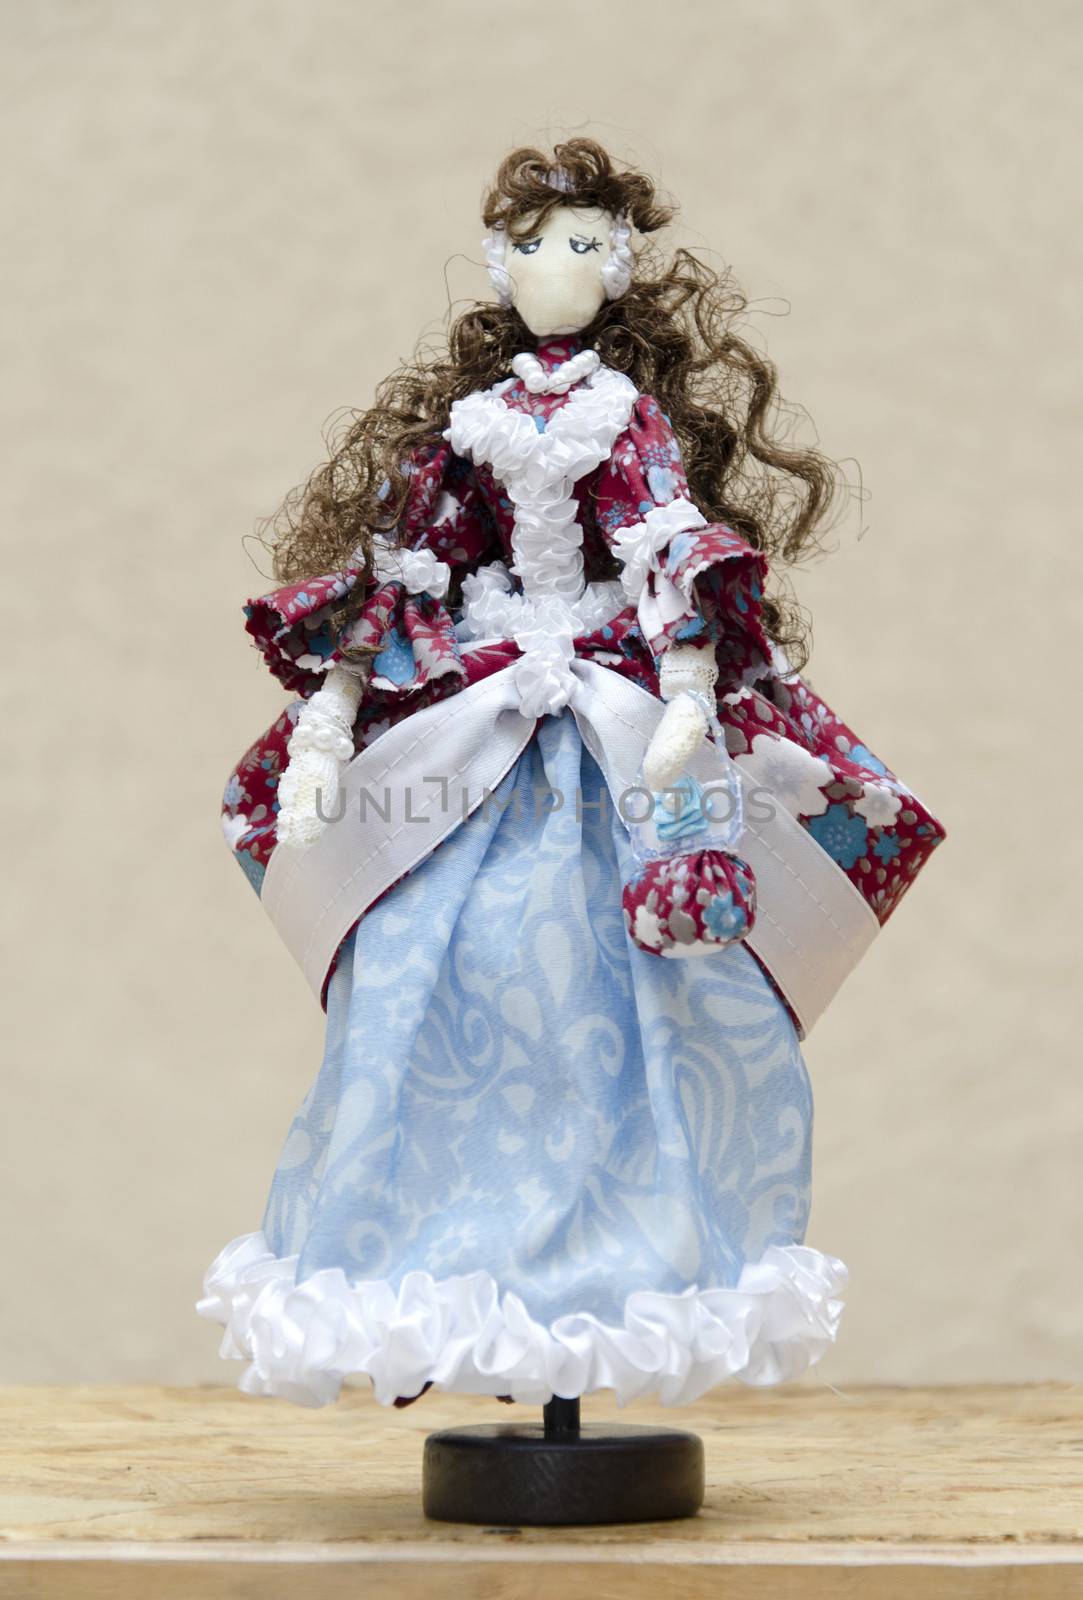 Handmade doll in a ball gown with bag on the stand